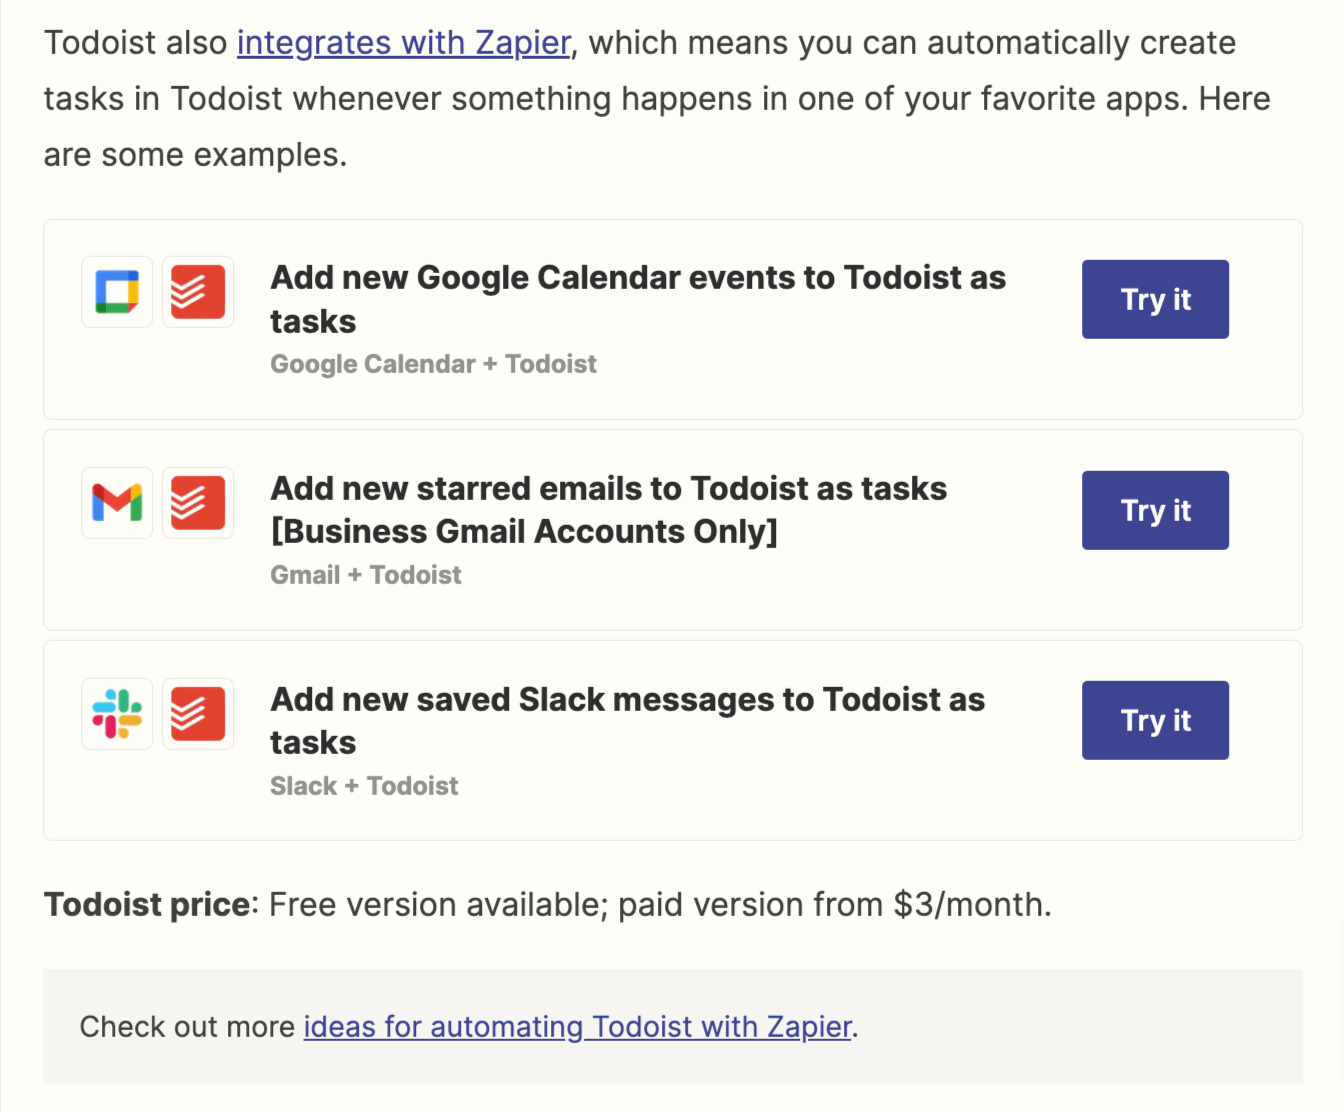 Calls to action in Zapier's article